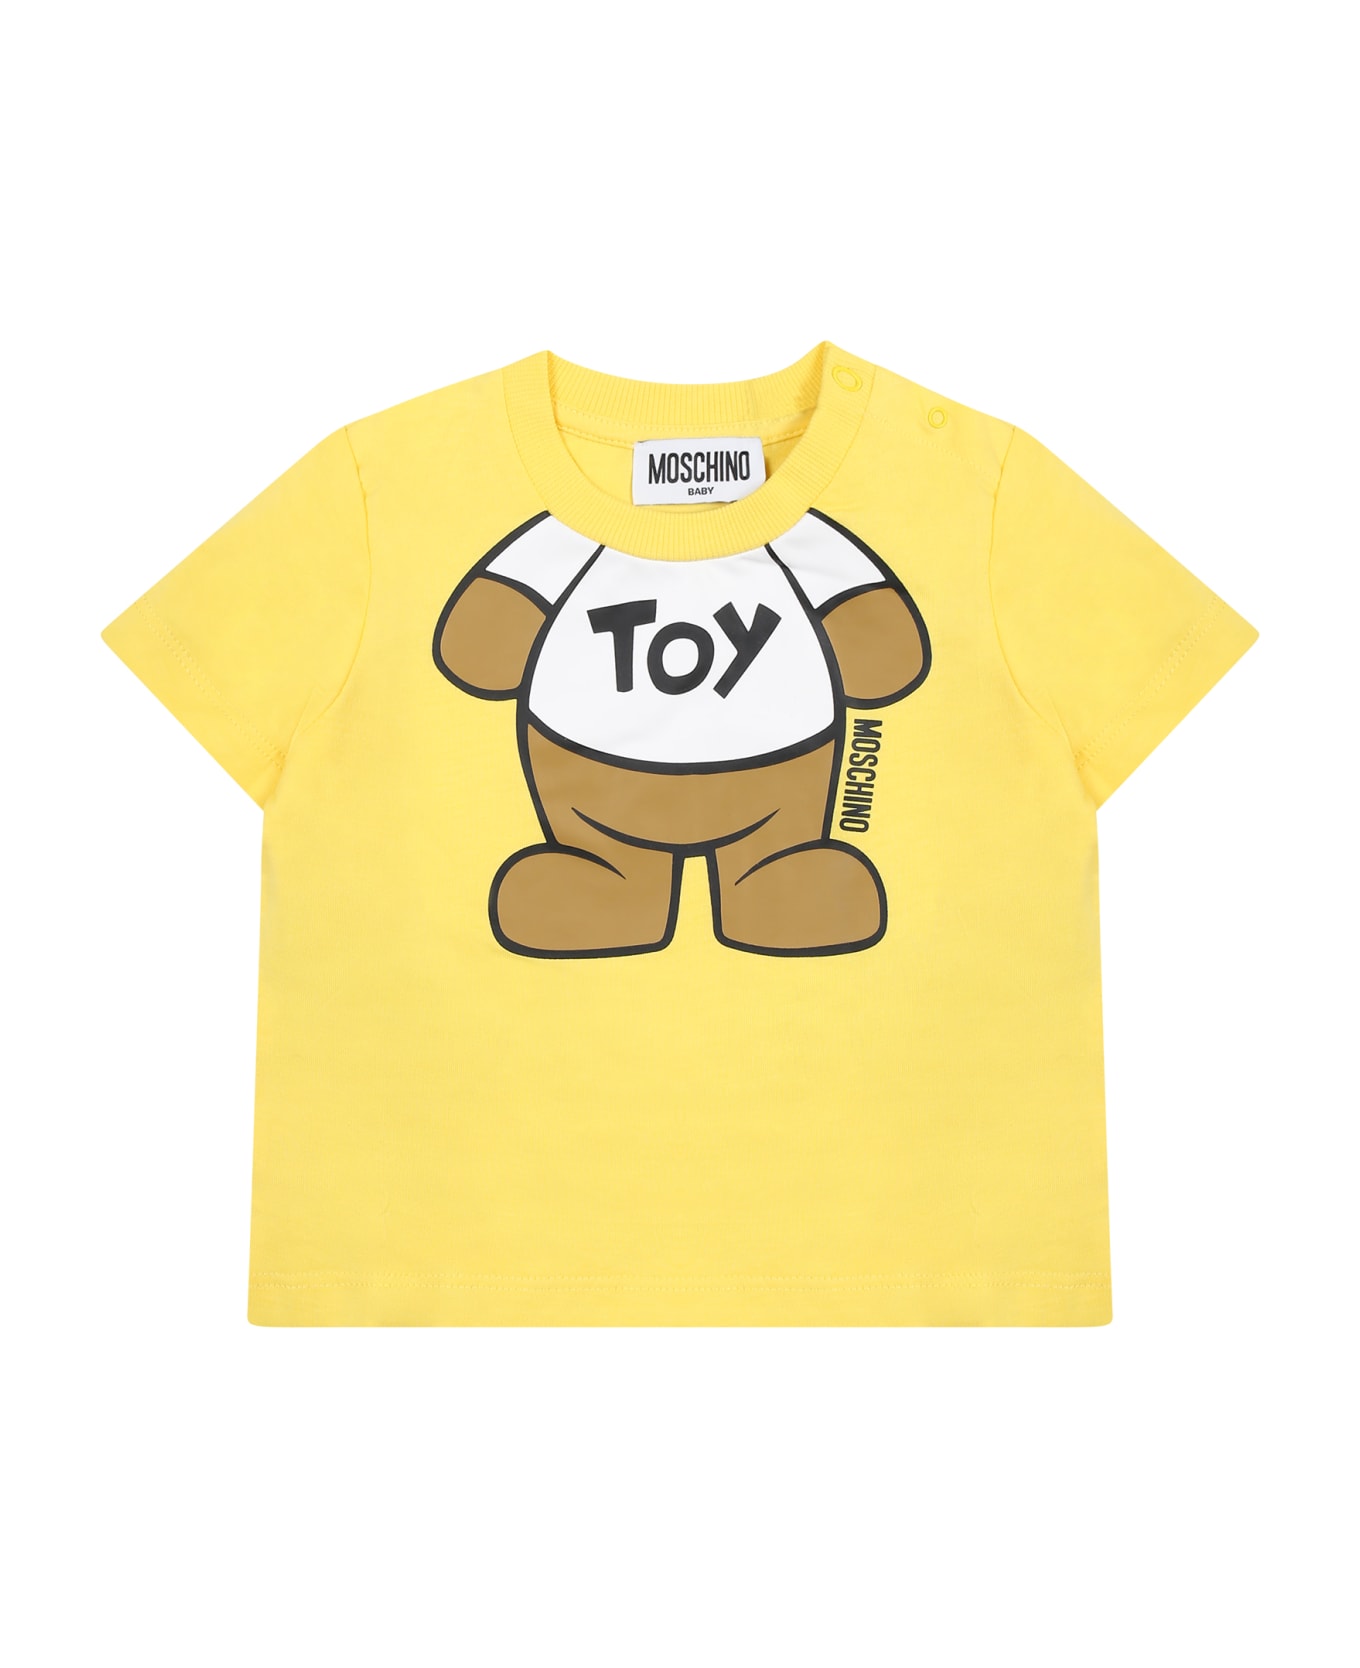 Moschino Yellow T-shirt For Baby Kids With Teddy Bear - Yellow